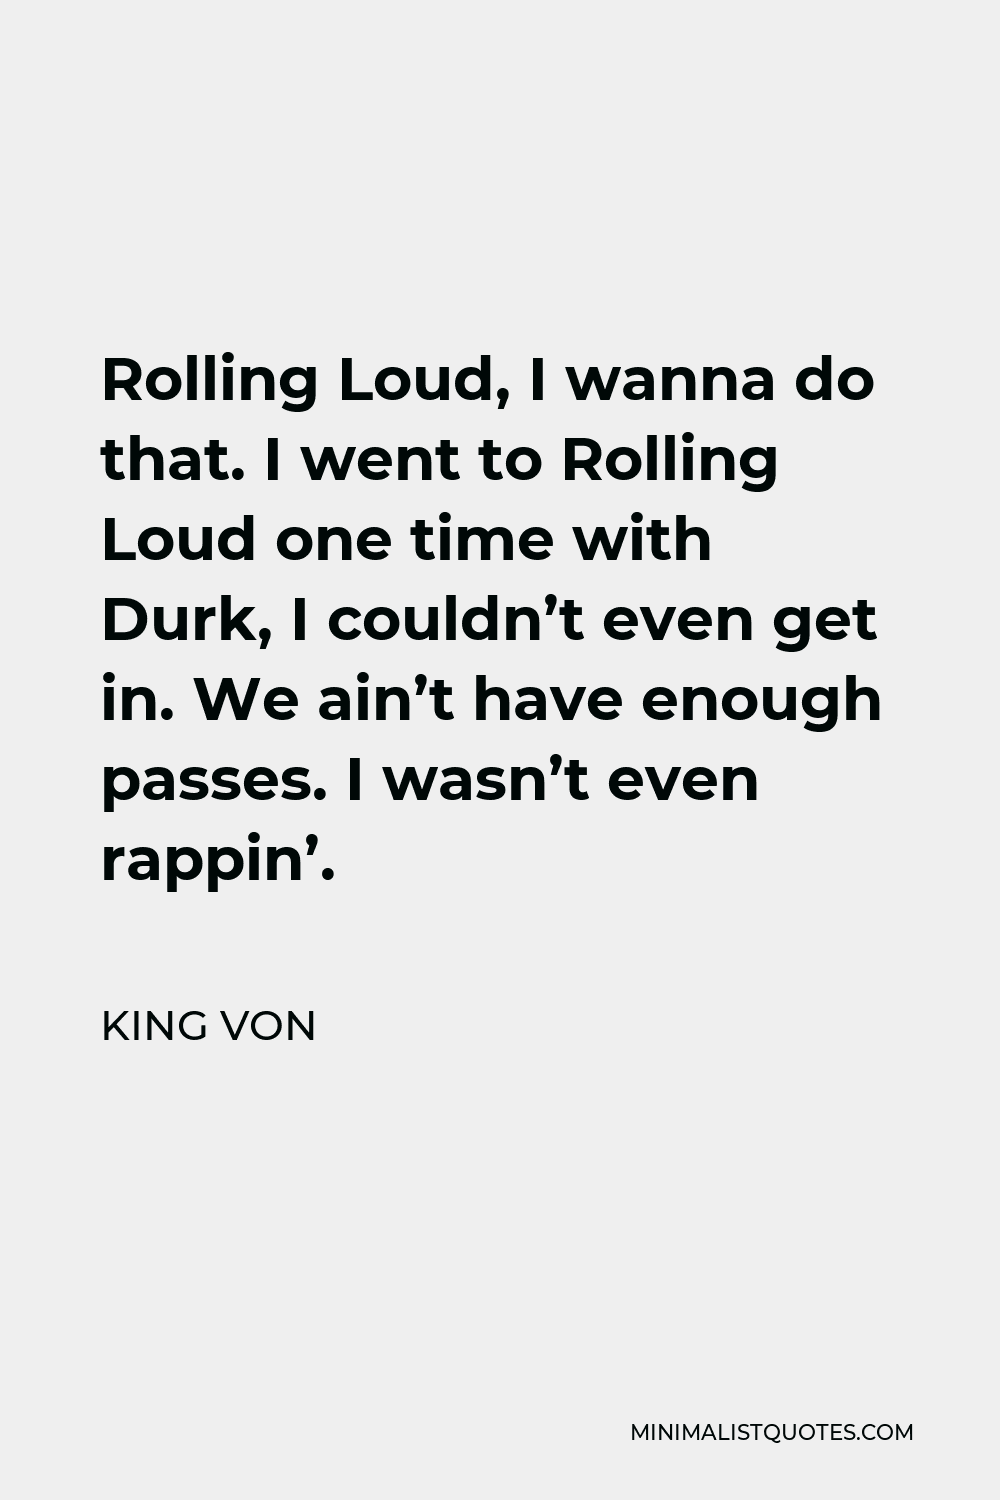 King Von Quote - Rolling Loud, I wanna do that. I went to Rolling Loud one time with Durk, I couldn’t even get in. We ain’t have enough passes. I wasn’t even rappin’.